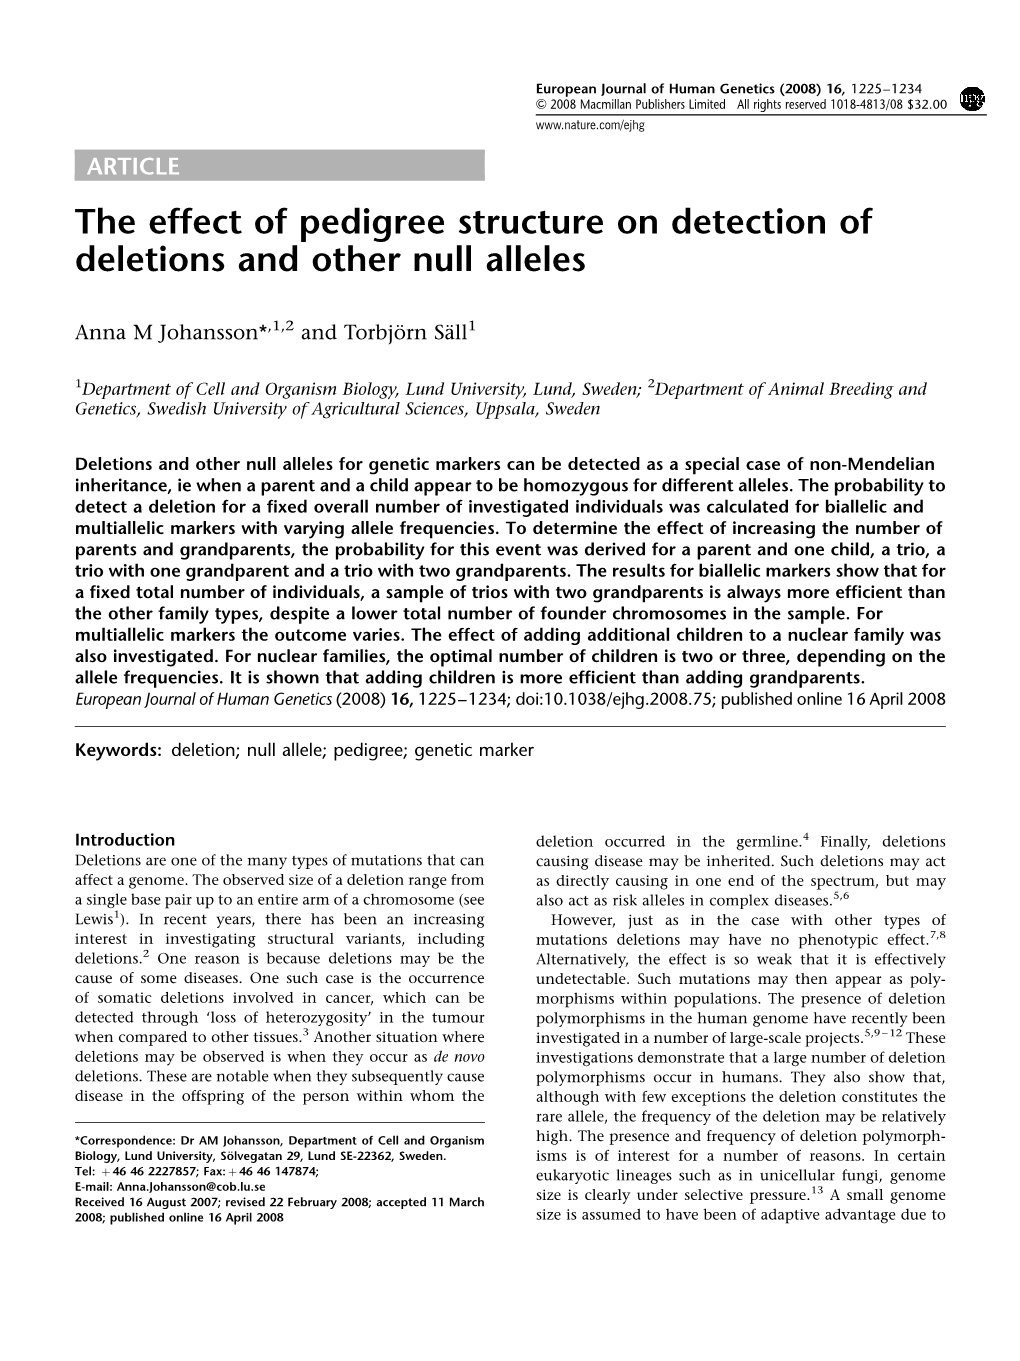 The Effect of Pedigree Structure on Detection of Deletions and Other Null Alleles